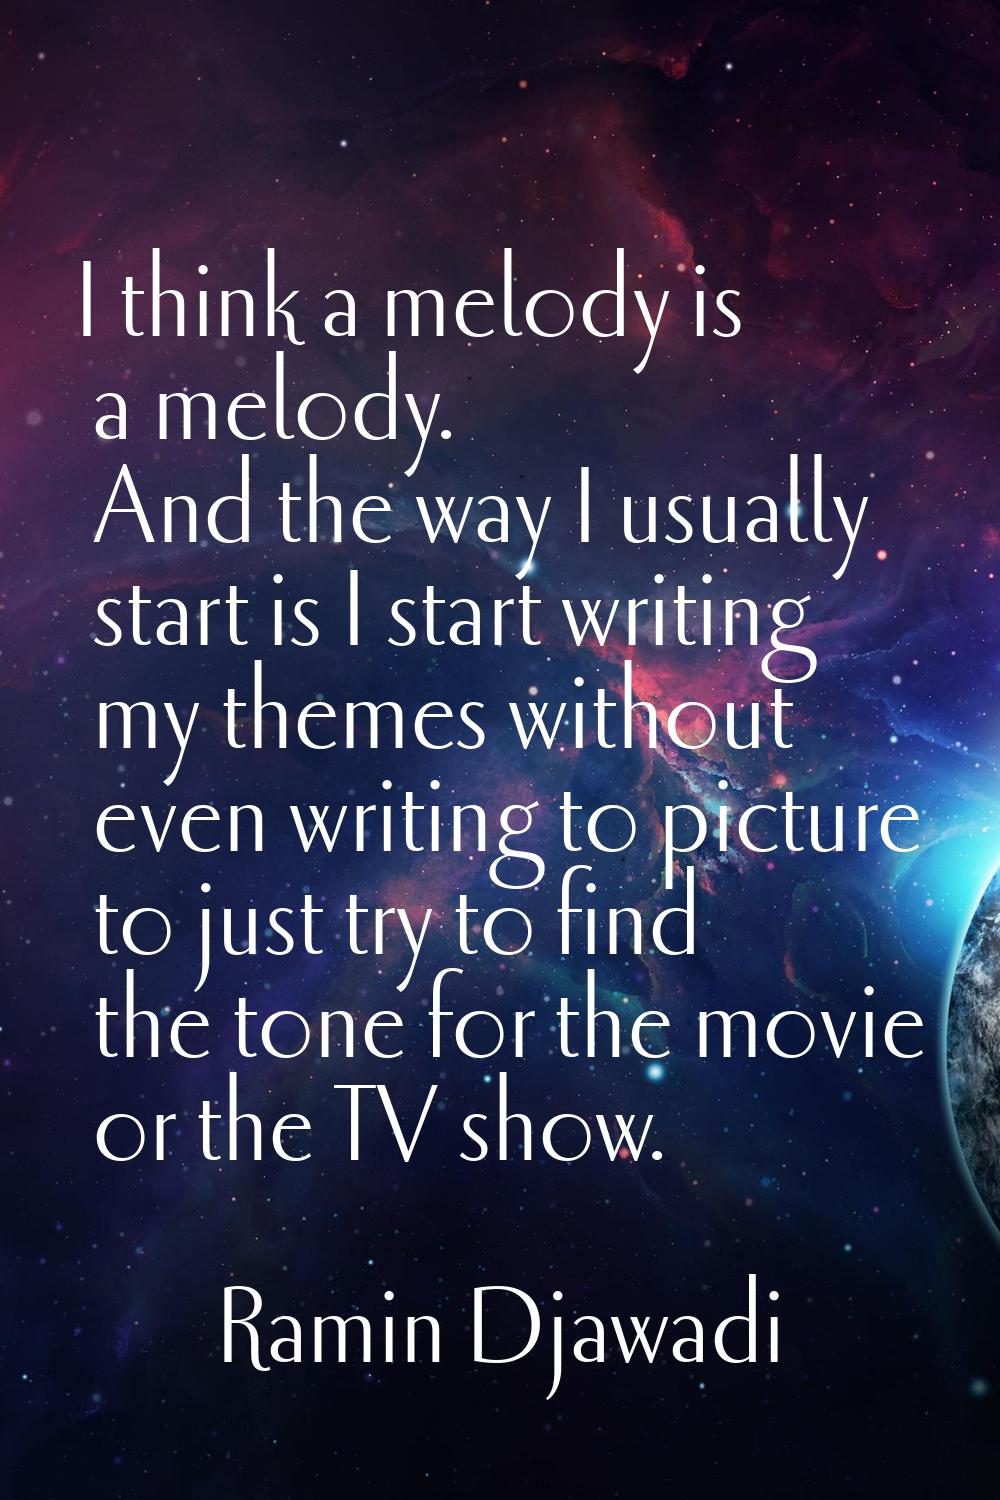 I think a melody is a melody. And the way I usually start is I start writing my themes without even